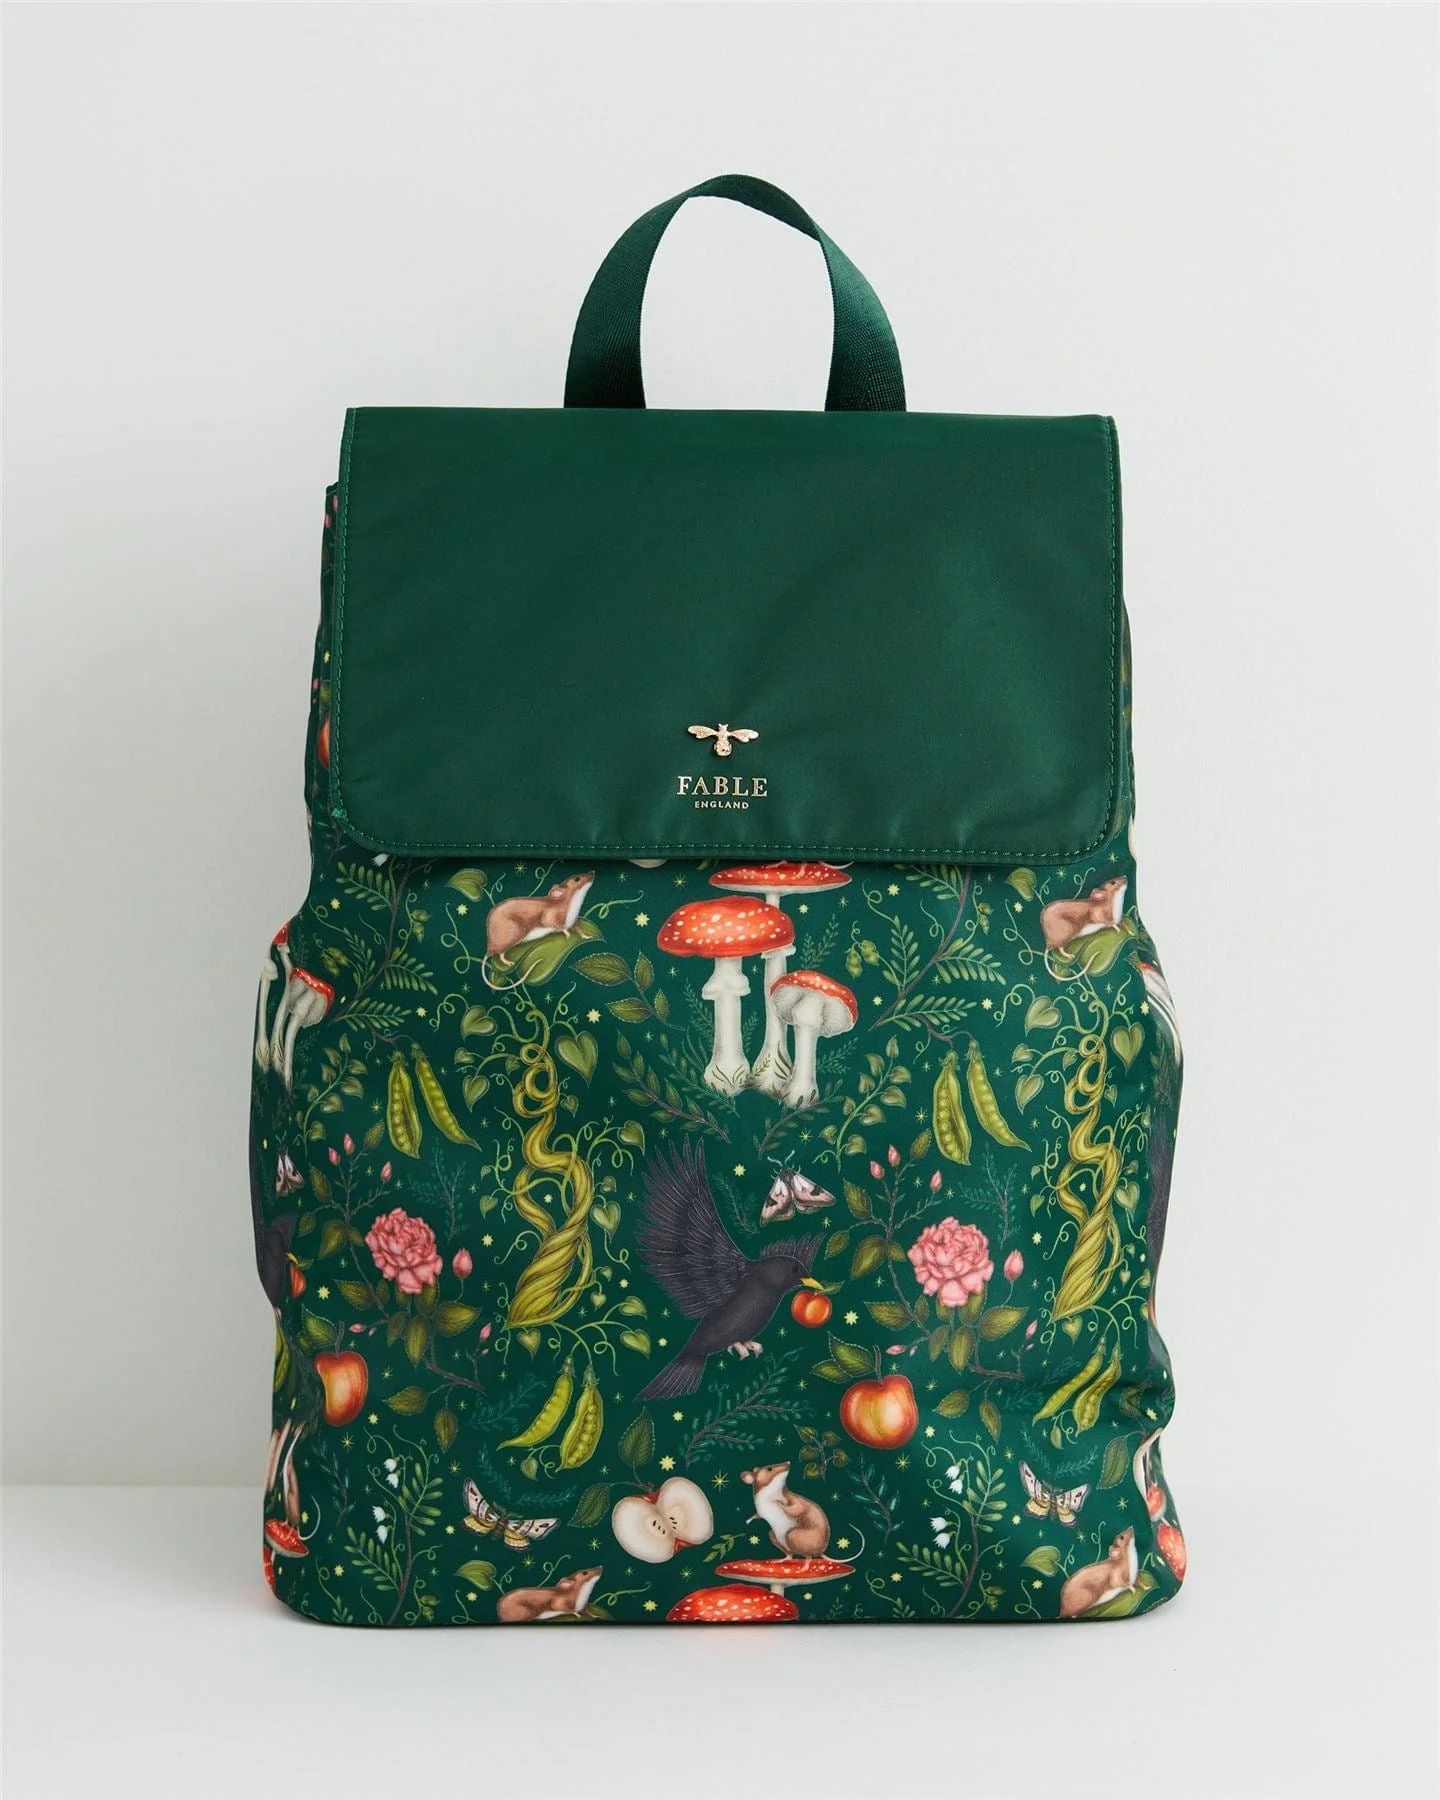 Catherine Rowe x Fable Into the Woods Green Backpack | Fable England